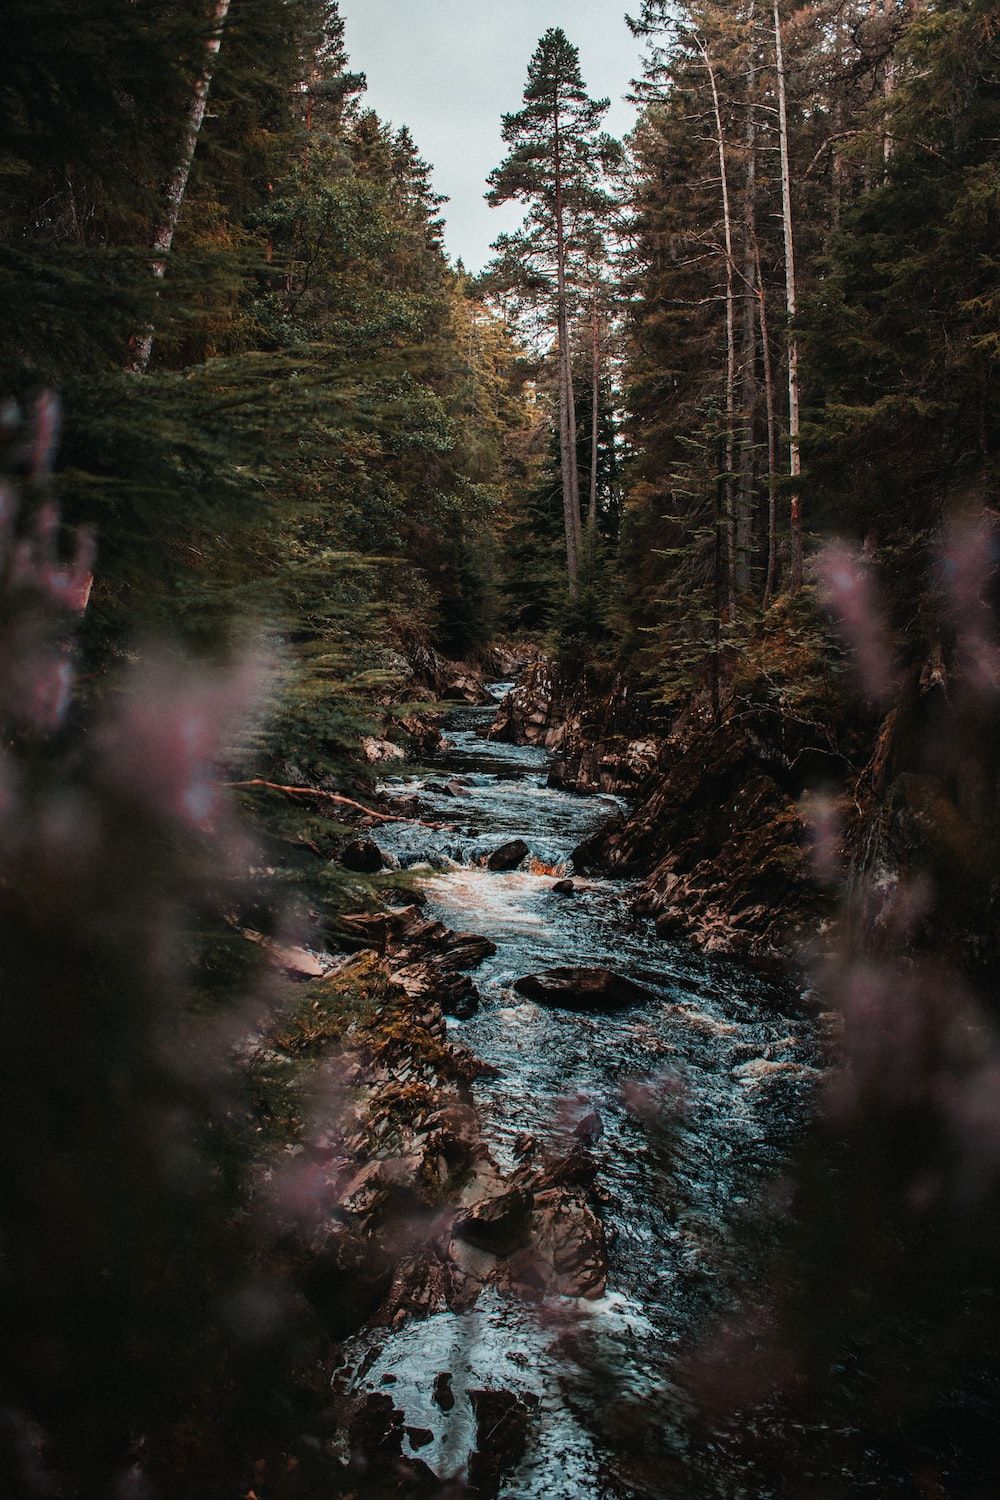 River in the middle of forest during daytime photo